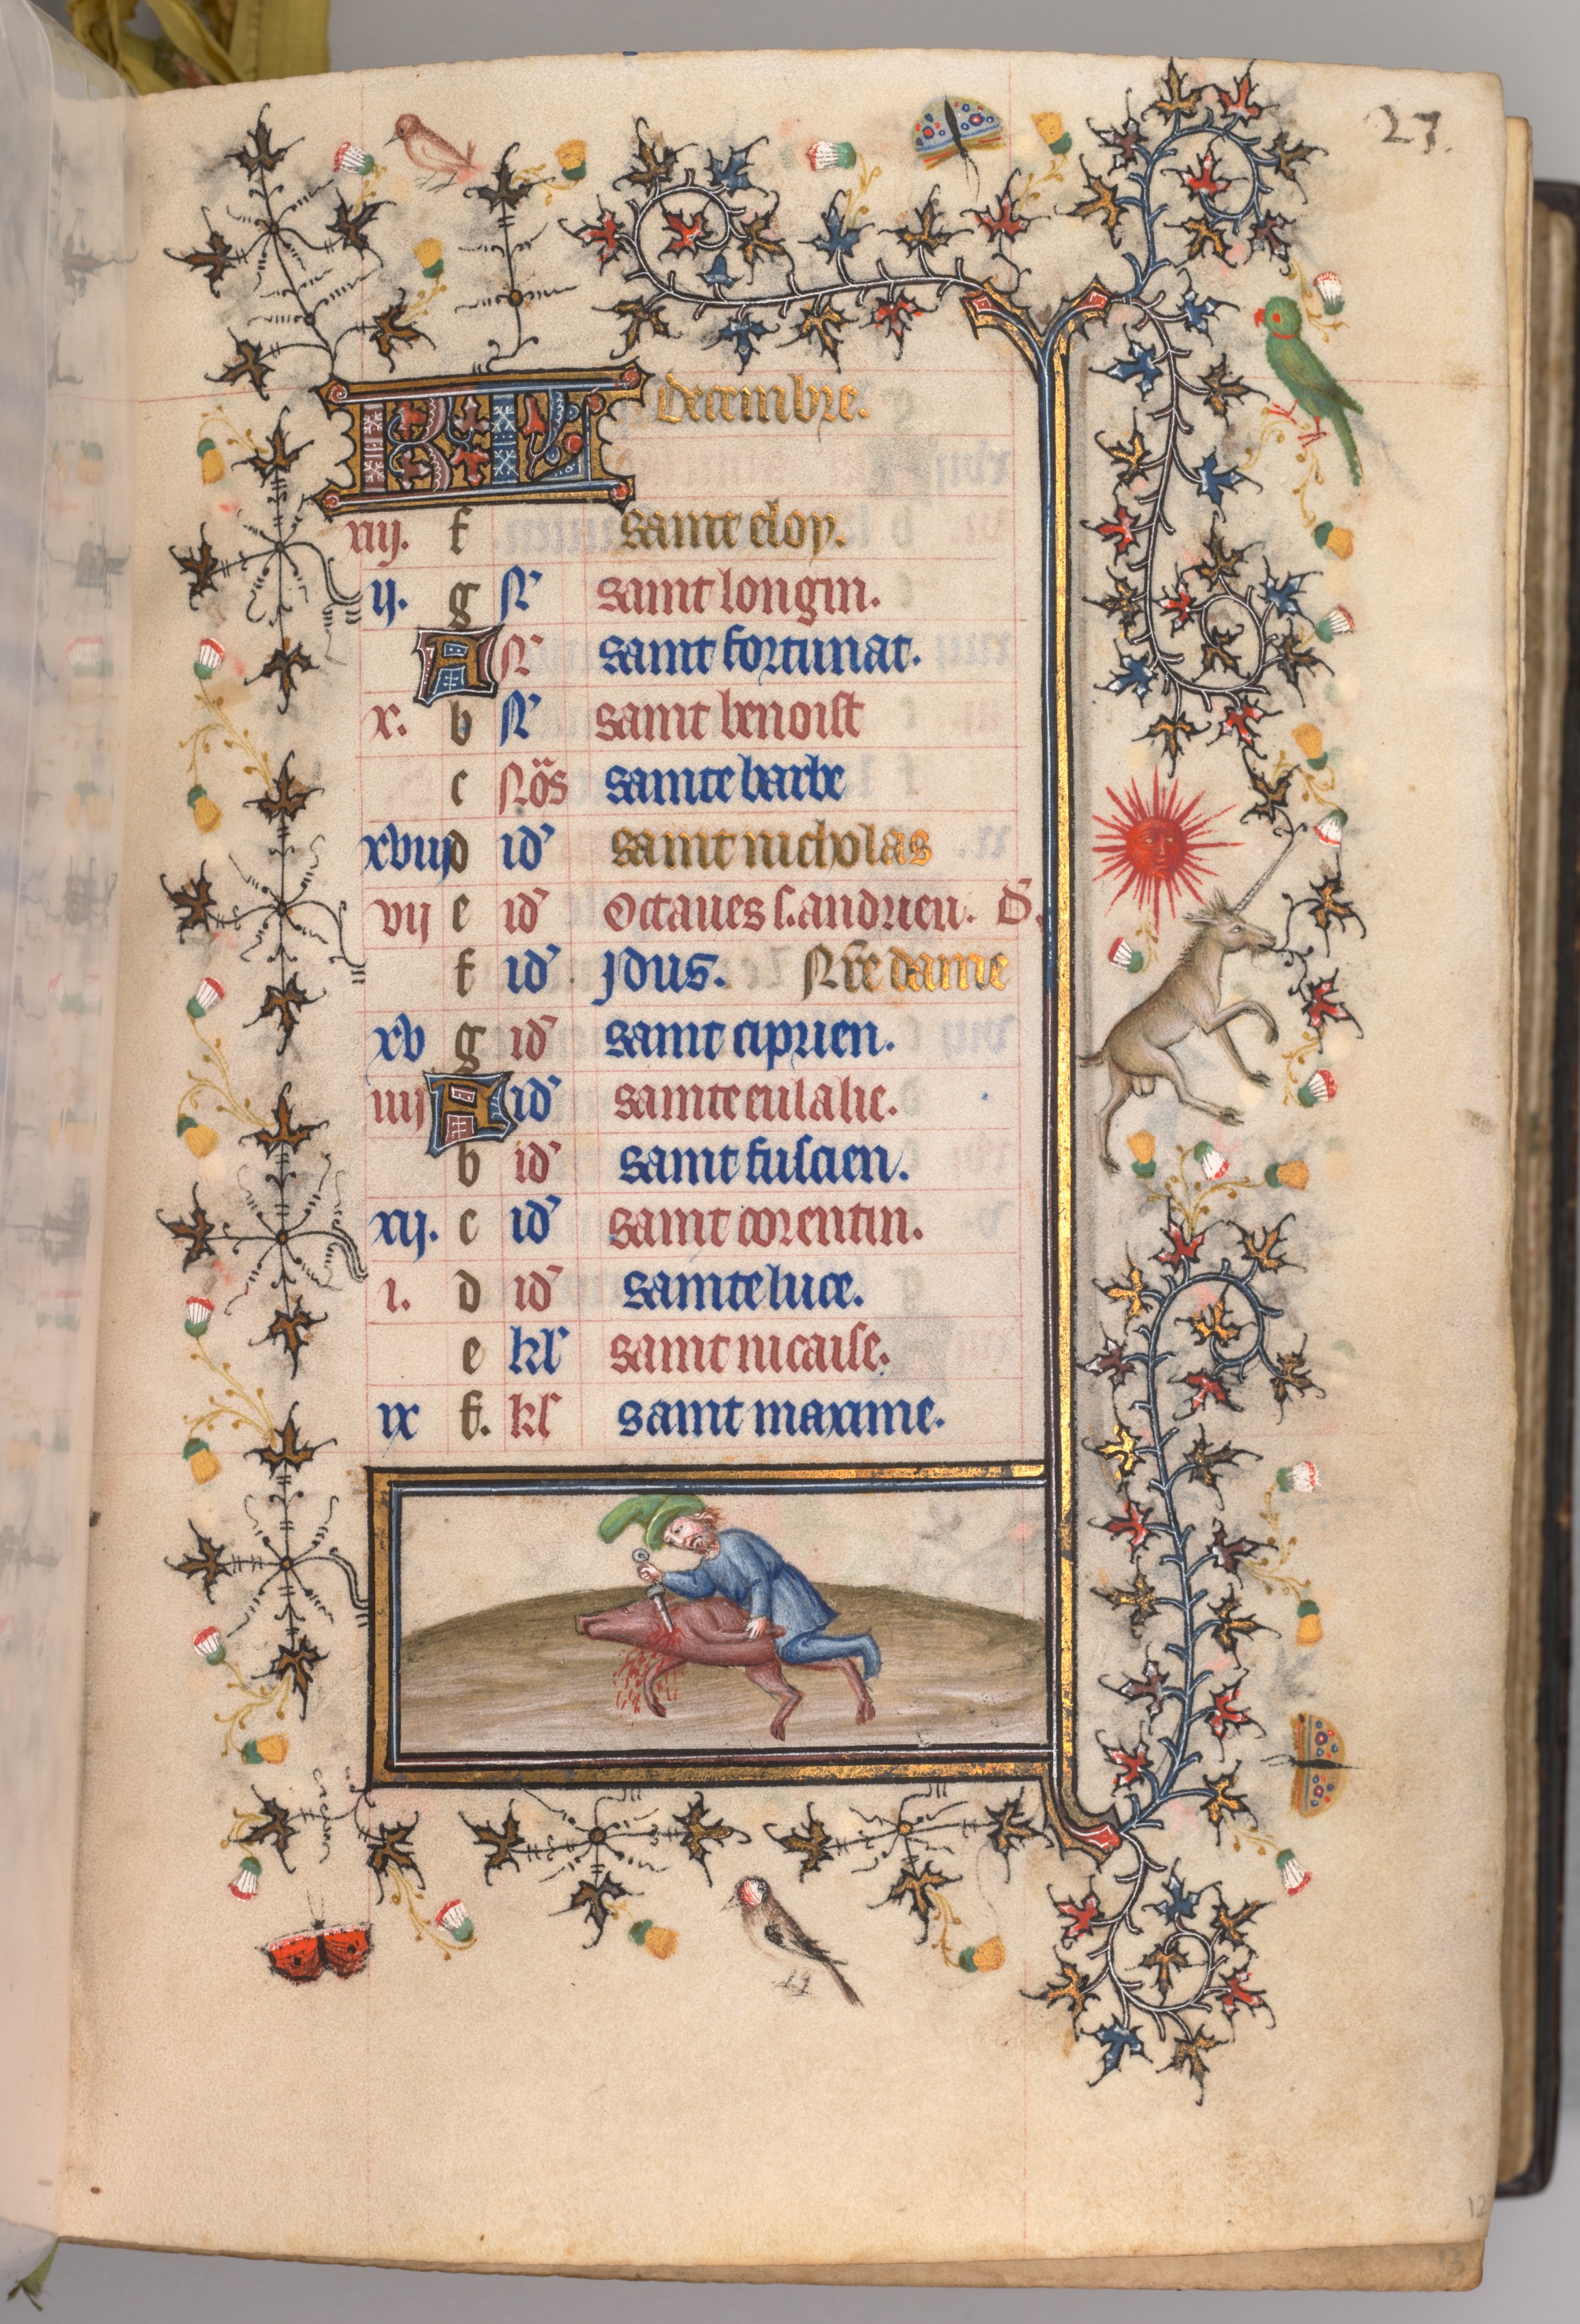 Hours of Charles the Noble, King of Navarre (1361-1425): fol. 12r, December